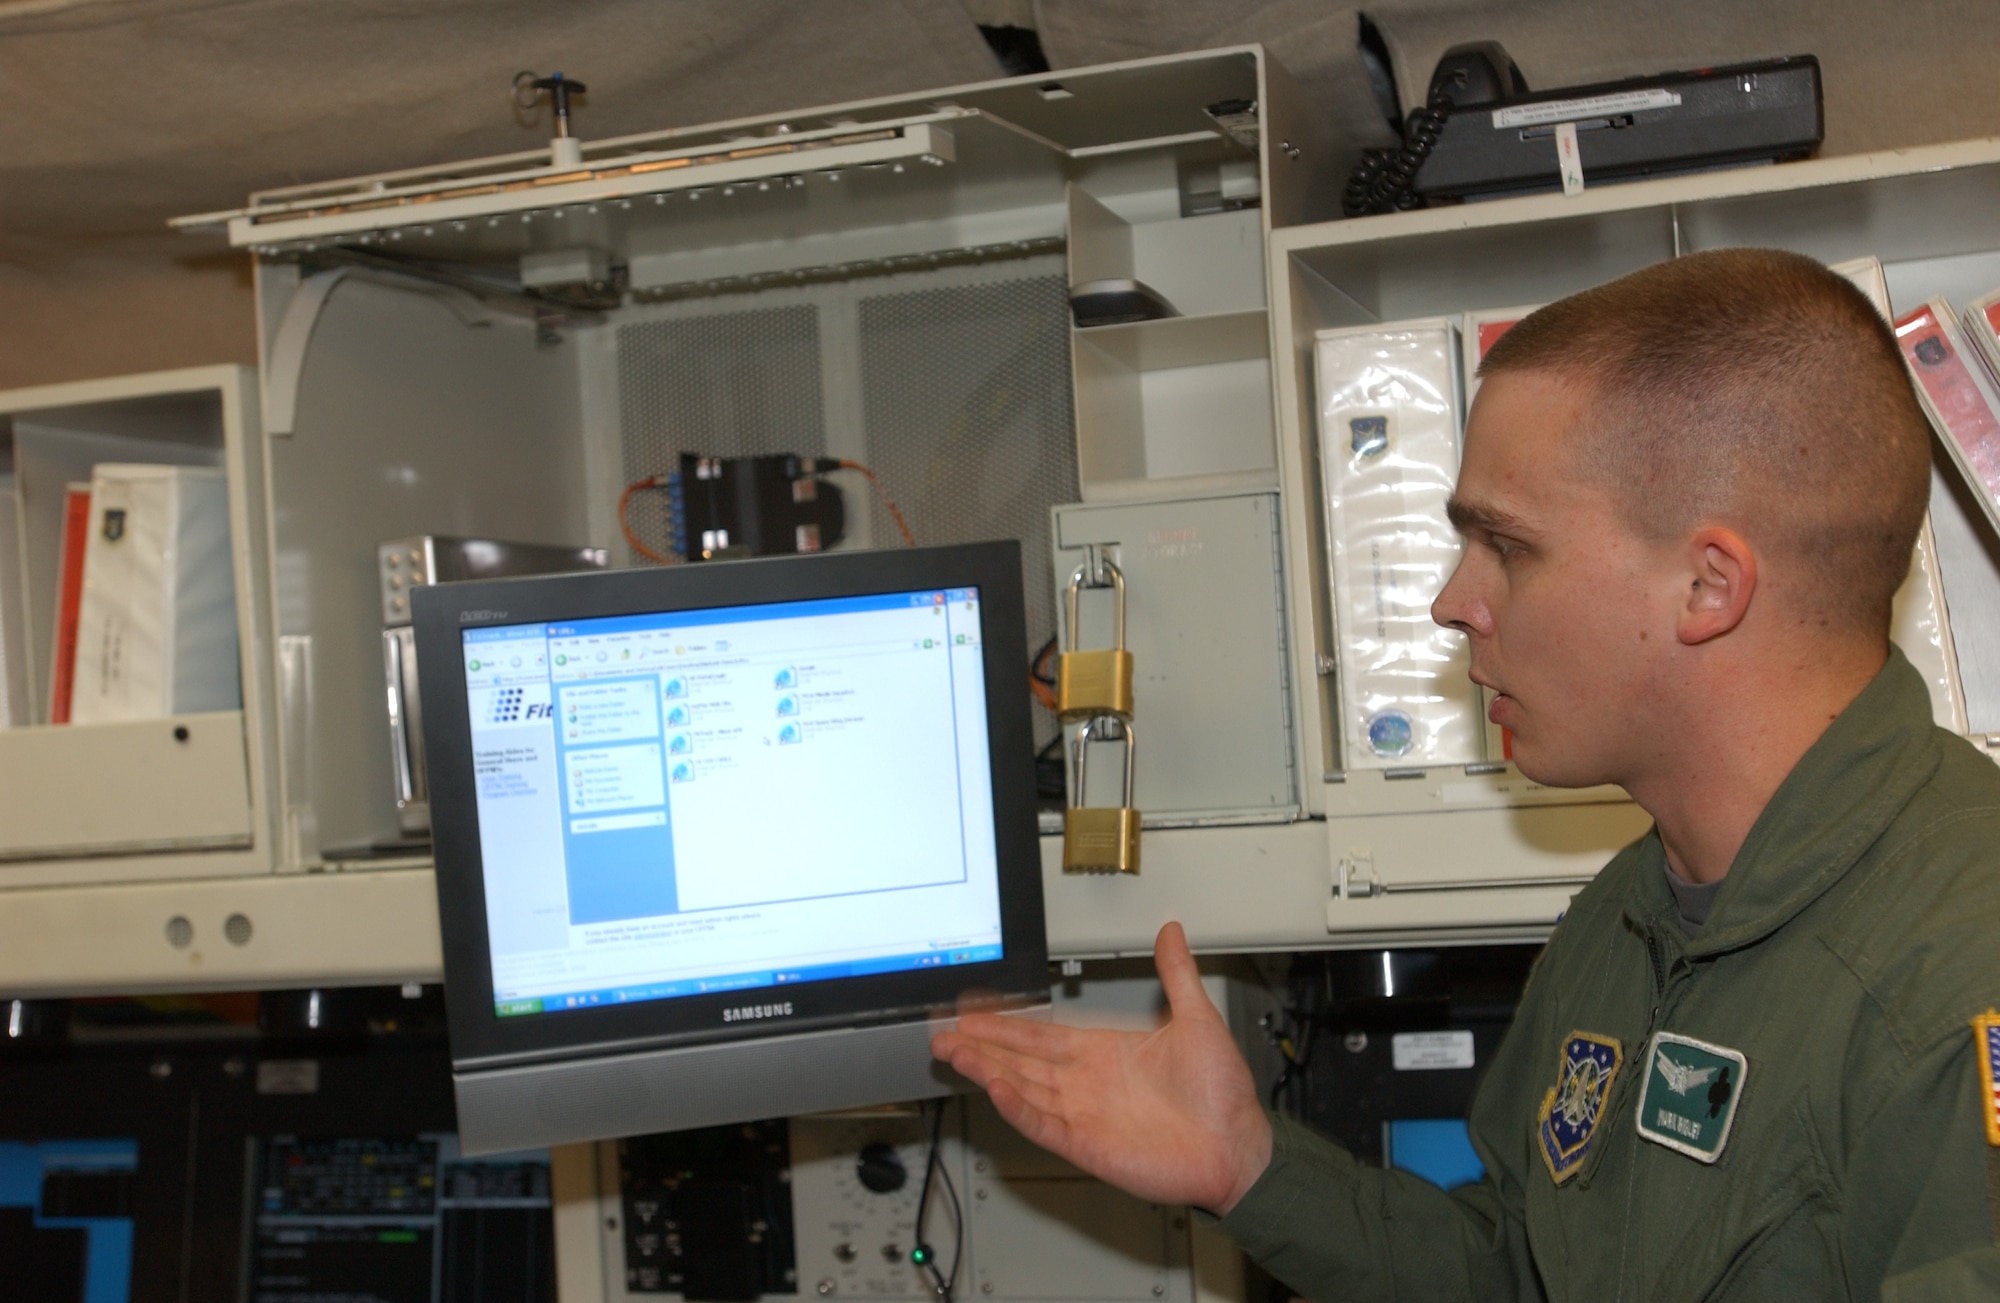 Capt. Mark Bigley, 741st Missile Squadron combat crew commander, explains how Juliet-01’s new computer with Internet access works within the launch control center May 30. The system, Netlink, allowing Internet access will undergo an initial trial phase of 60 days to collect data on the success of the new system. If the results deem positive then a blanket approval will be sought to install the same system at all 15 missile alert facilities within the 91st Space Wing. U.S. Air Force photo by Airman 1st Class Cassandra Butler)